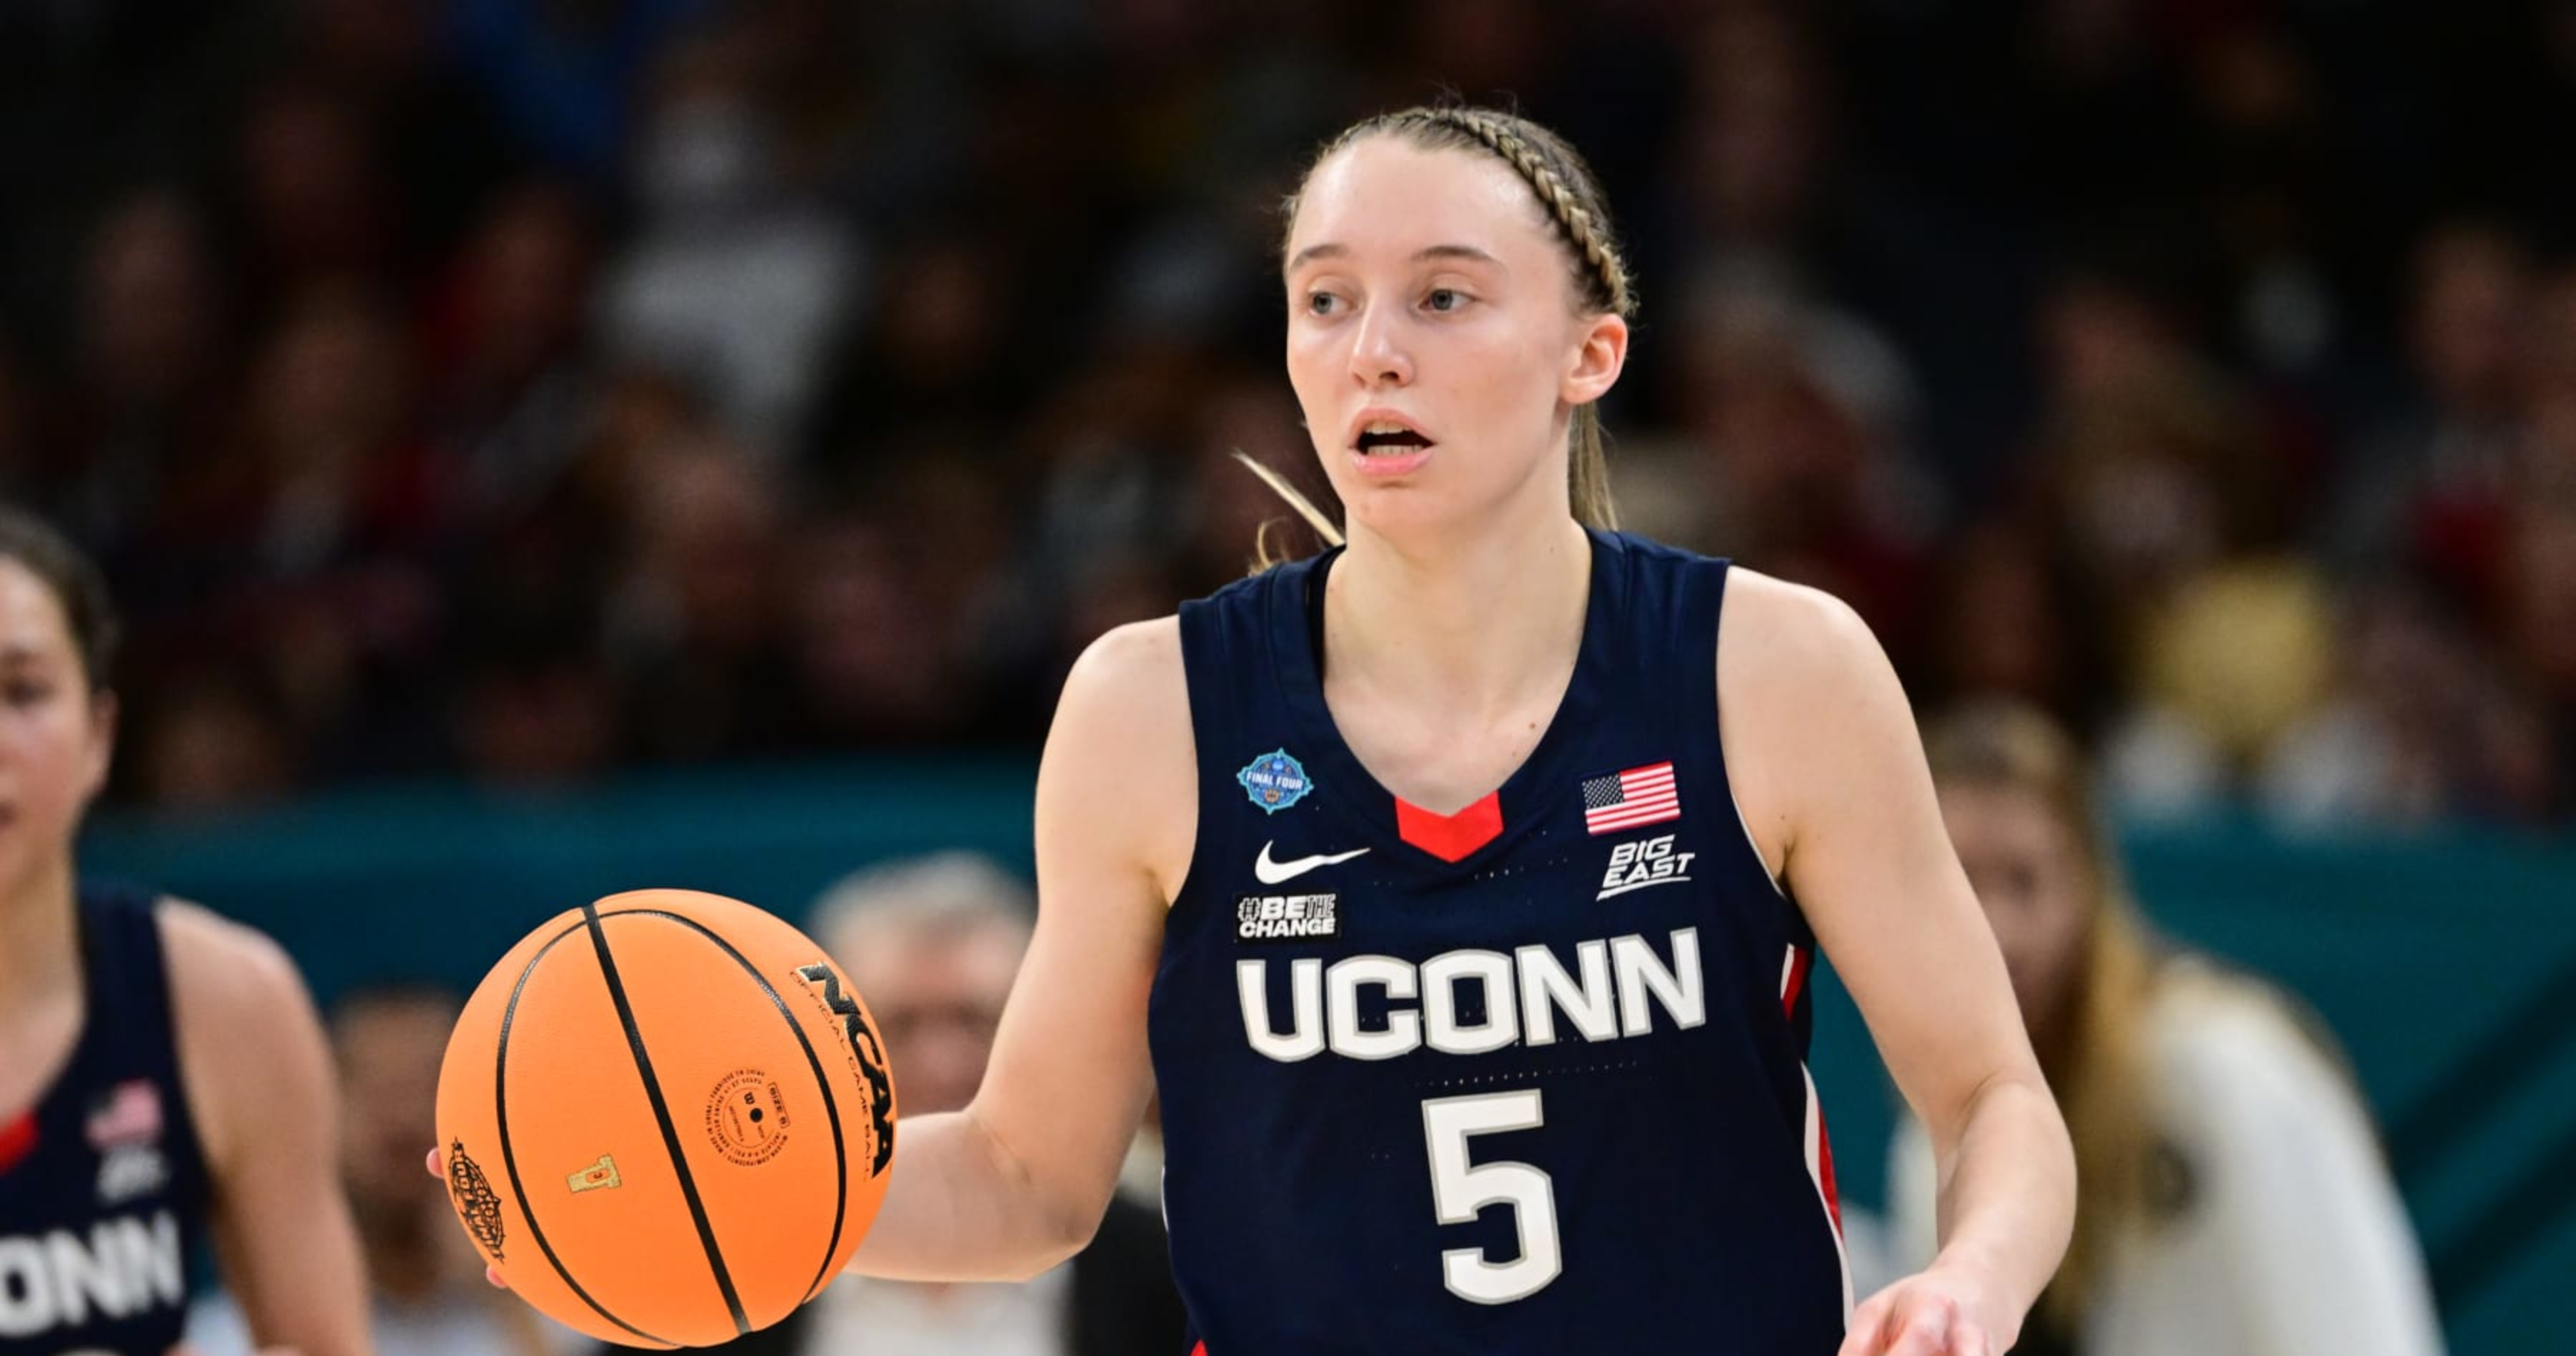 UConn's Paige Bueckers Tears ACL, Will Miss 2022-23 Season with Knee Injury